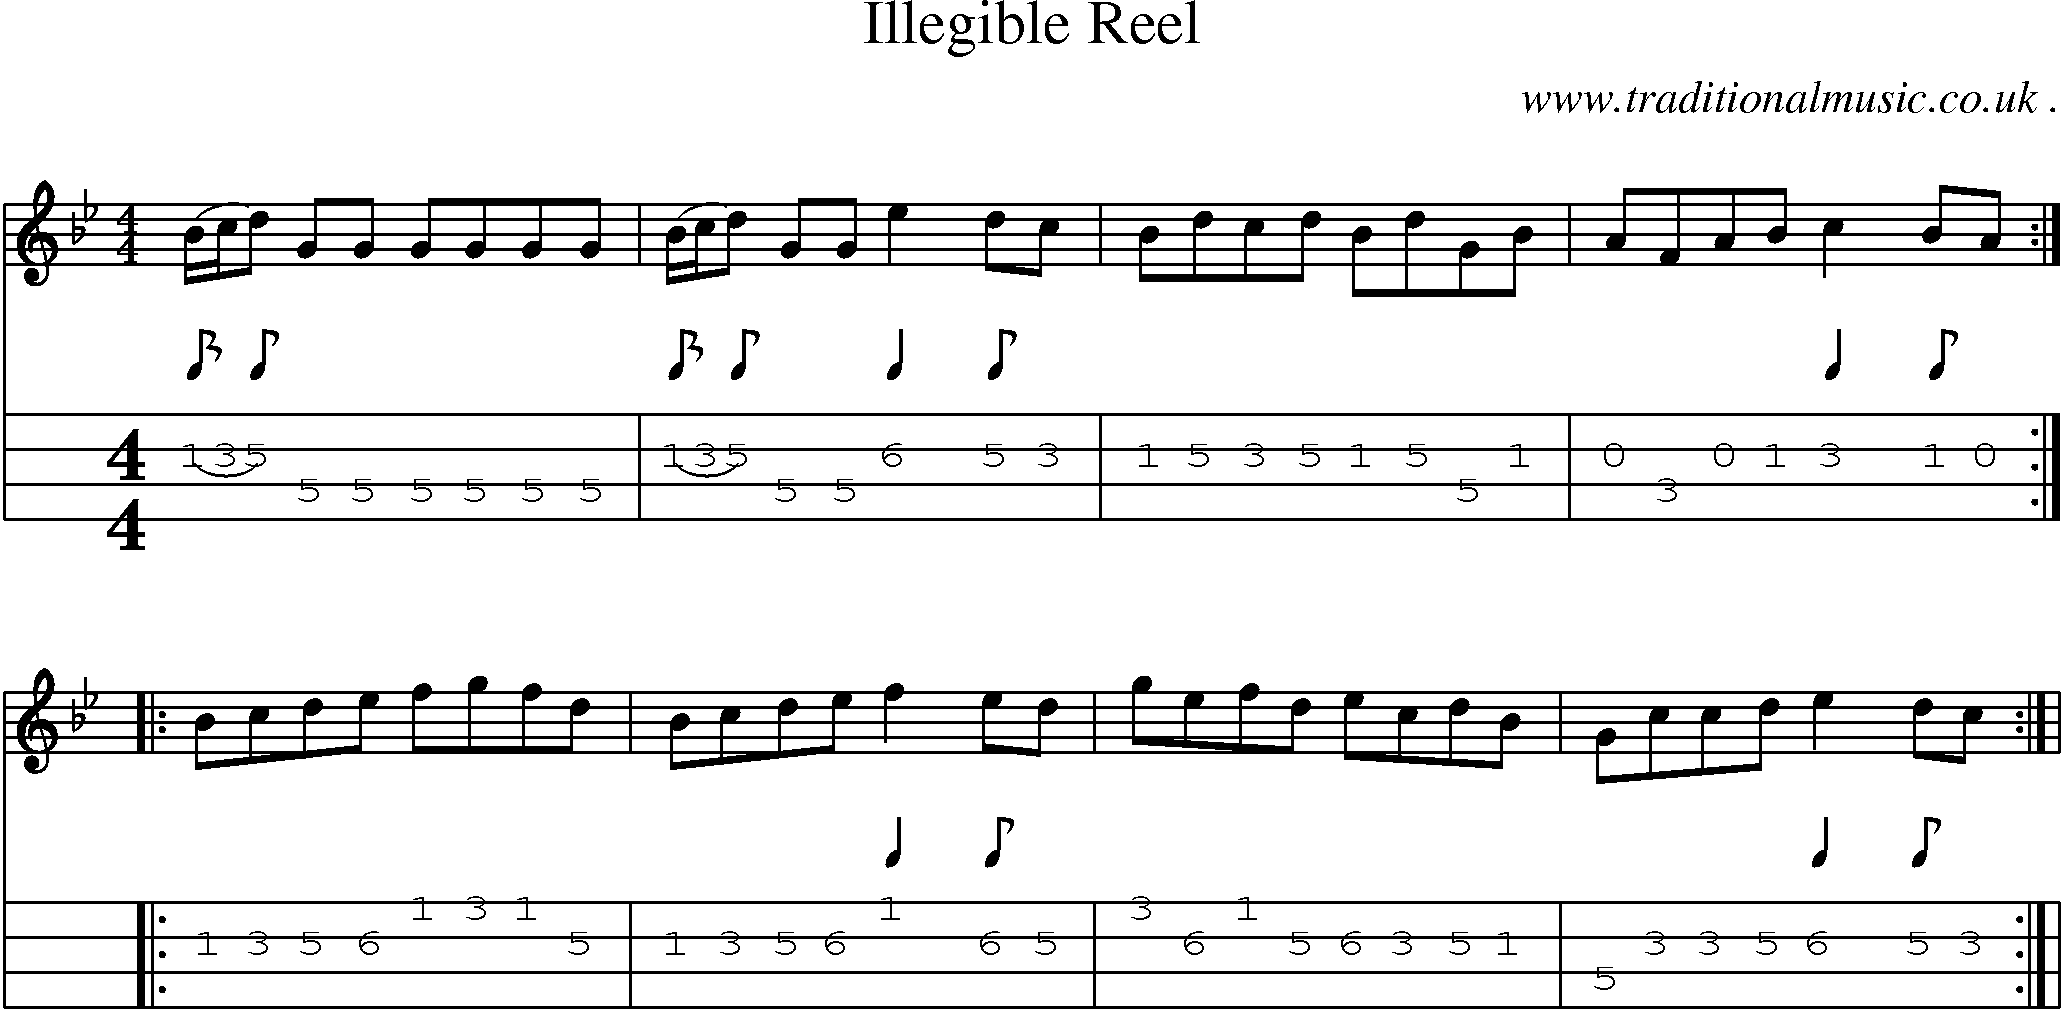 Sheet-Music and Mandolin Tabs for Illegible Reel